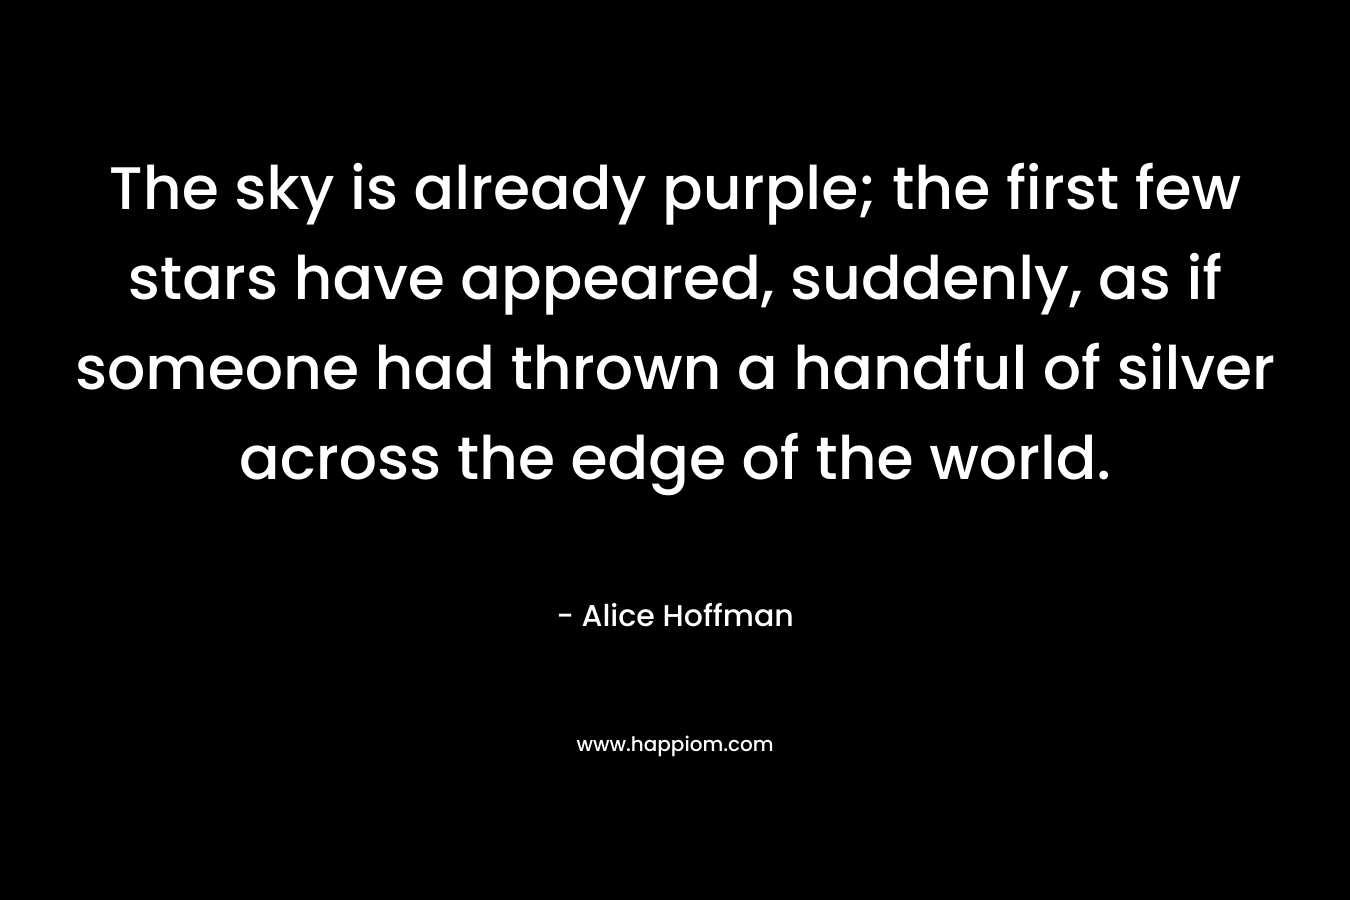 The sky is already purple; the first few stars have appeared, suddenly, as if someone had thrown a handful of silver across the edge of the world. – Alice Hoffman